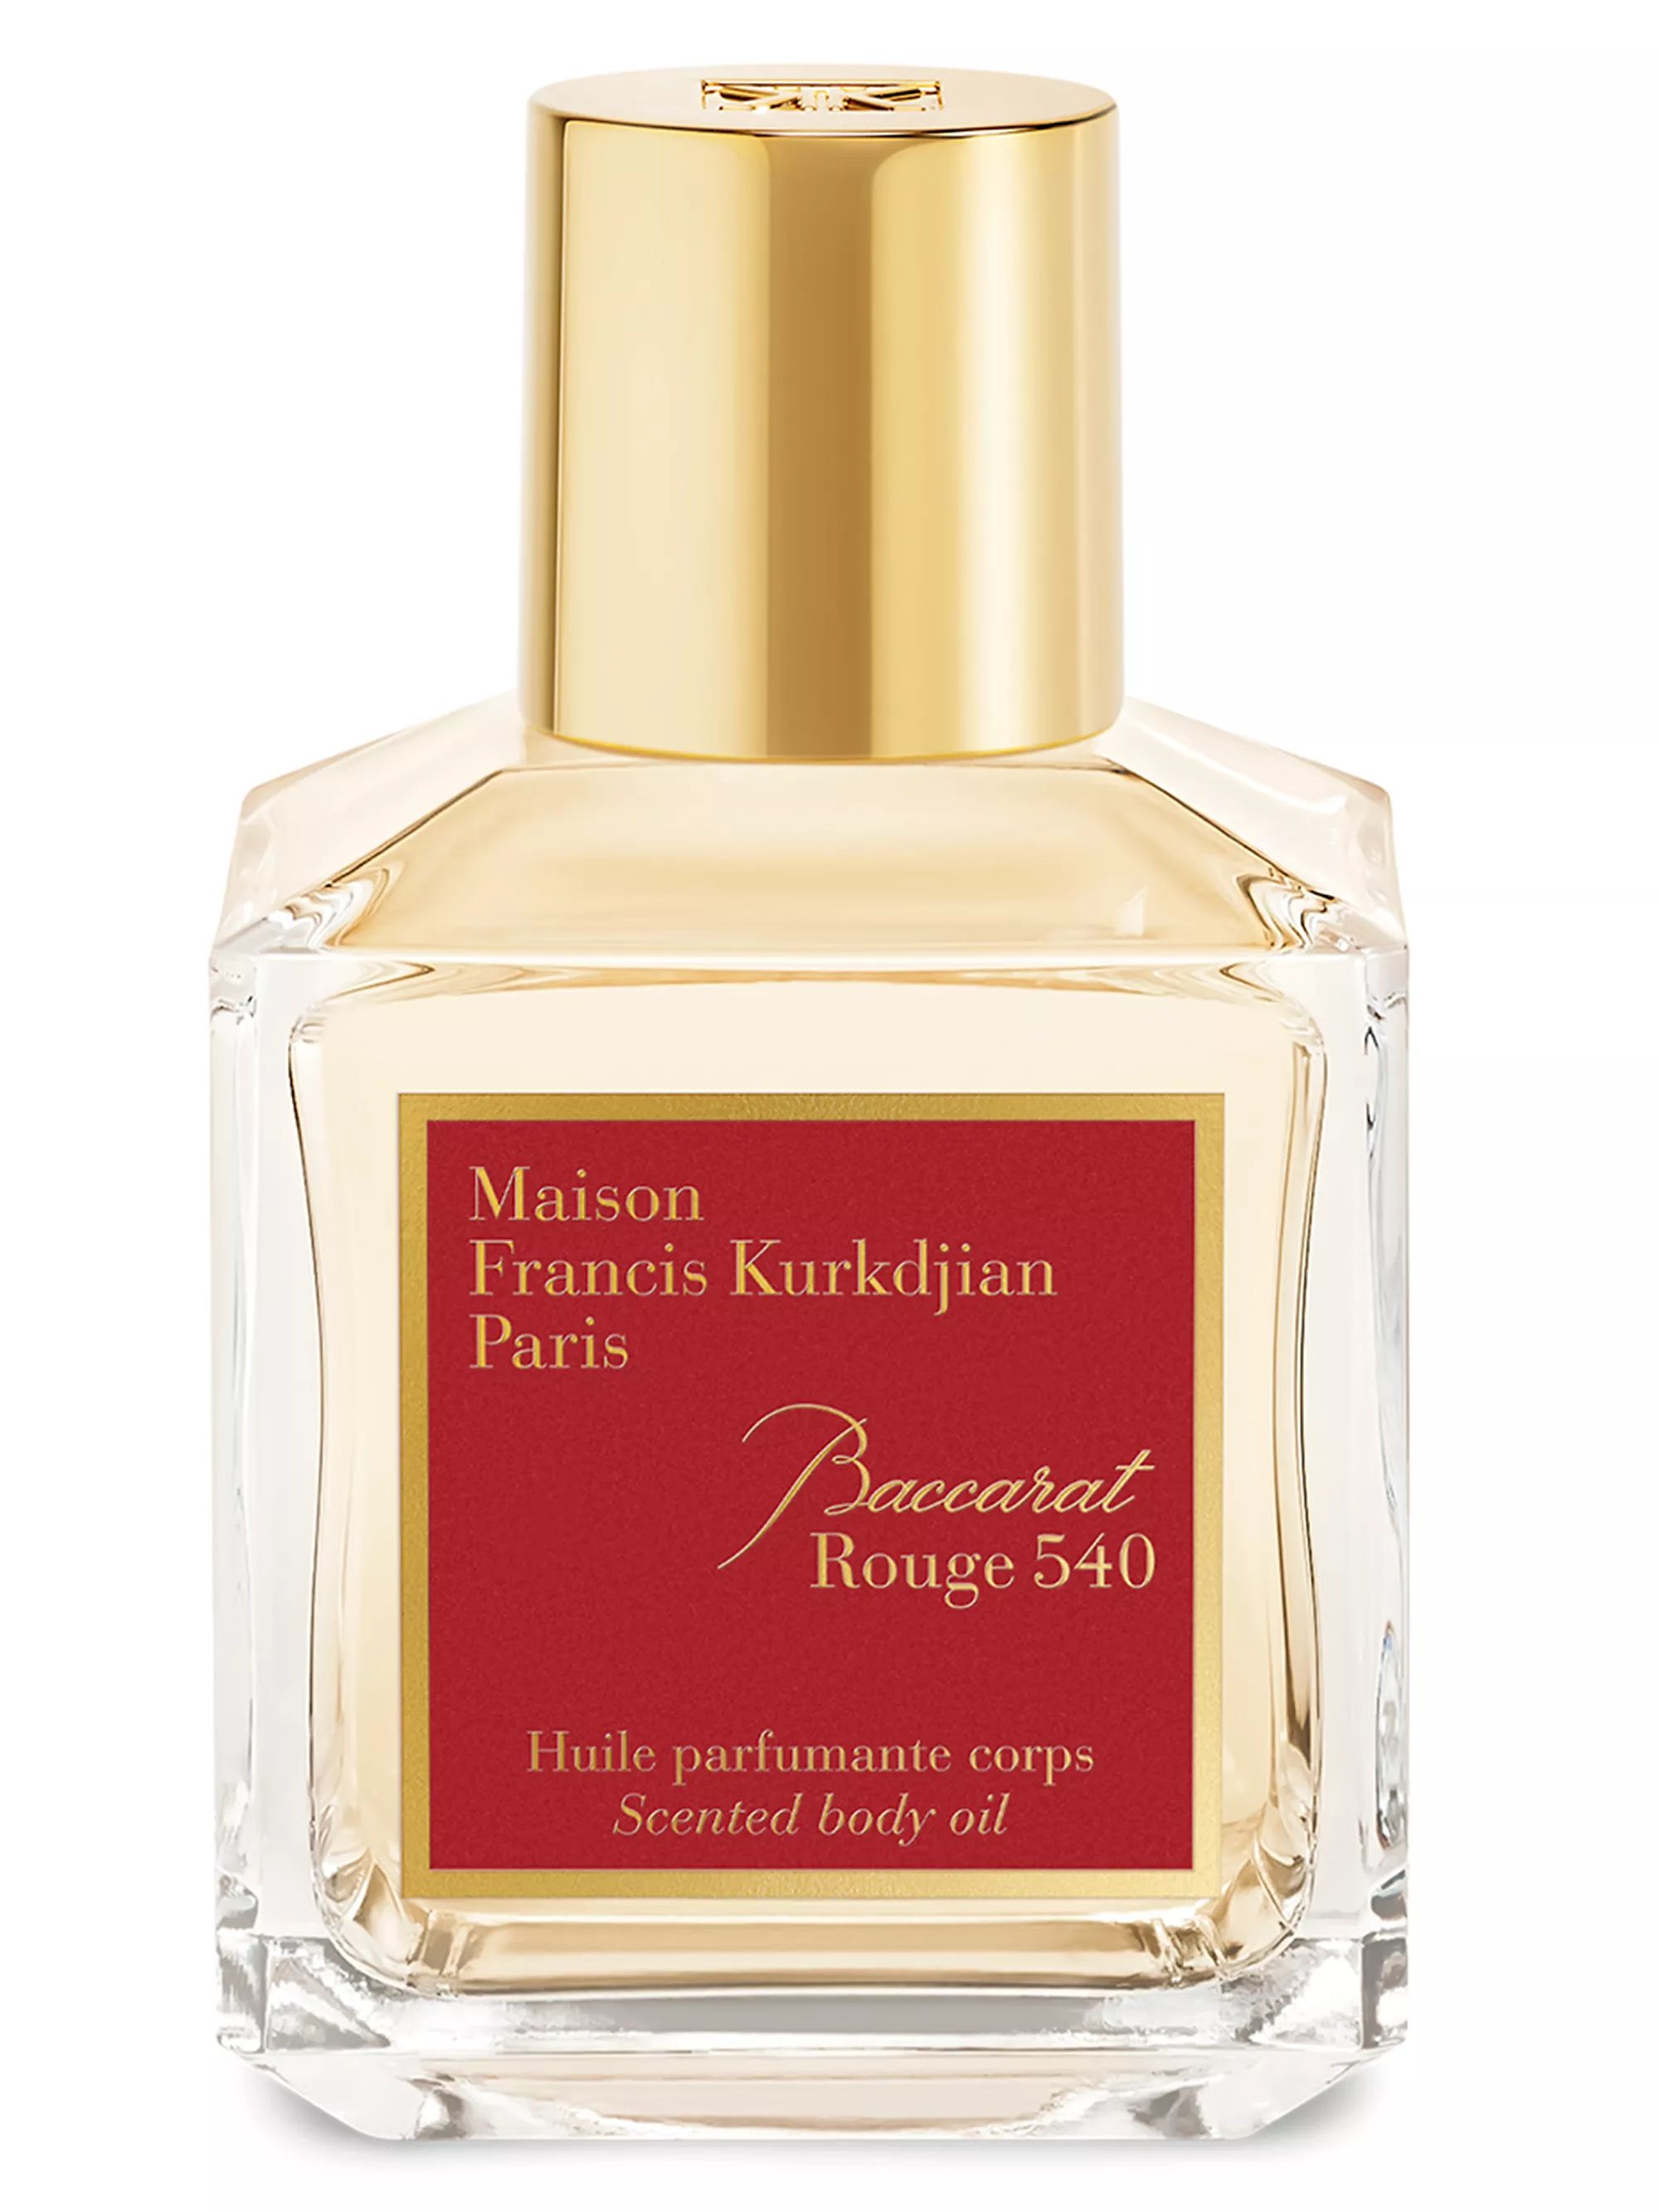 Baccarat Rouge 540 Scented Body Oil | Saks Fifth Avenue